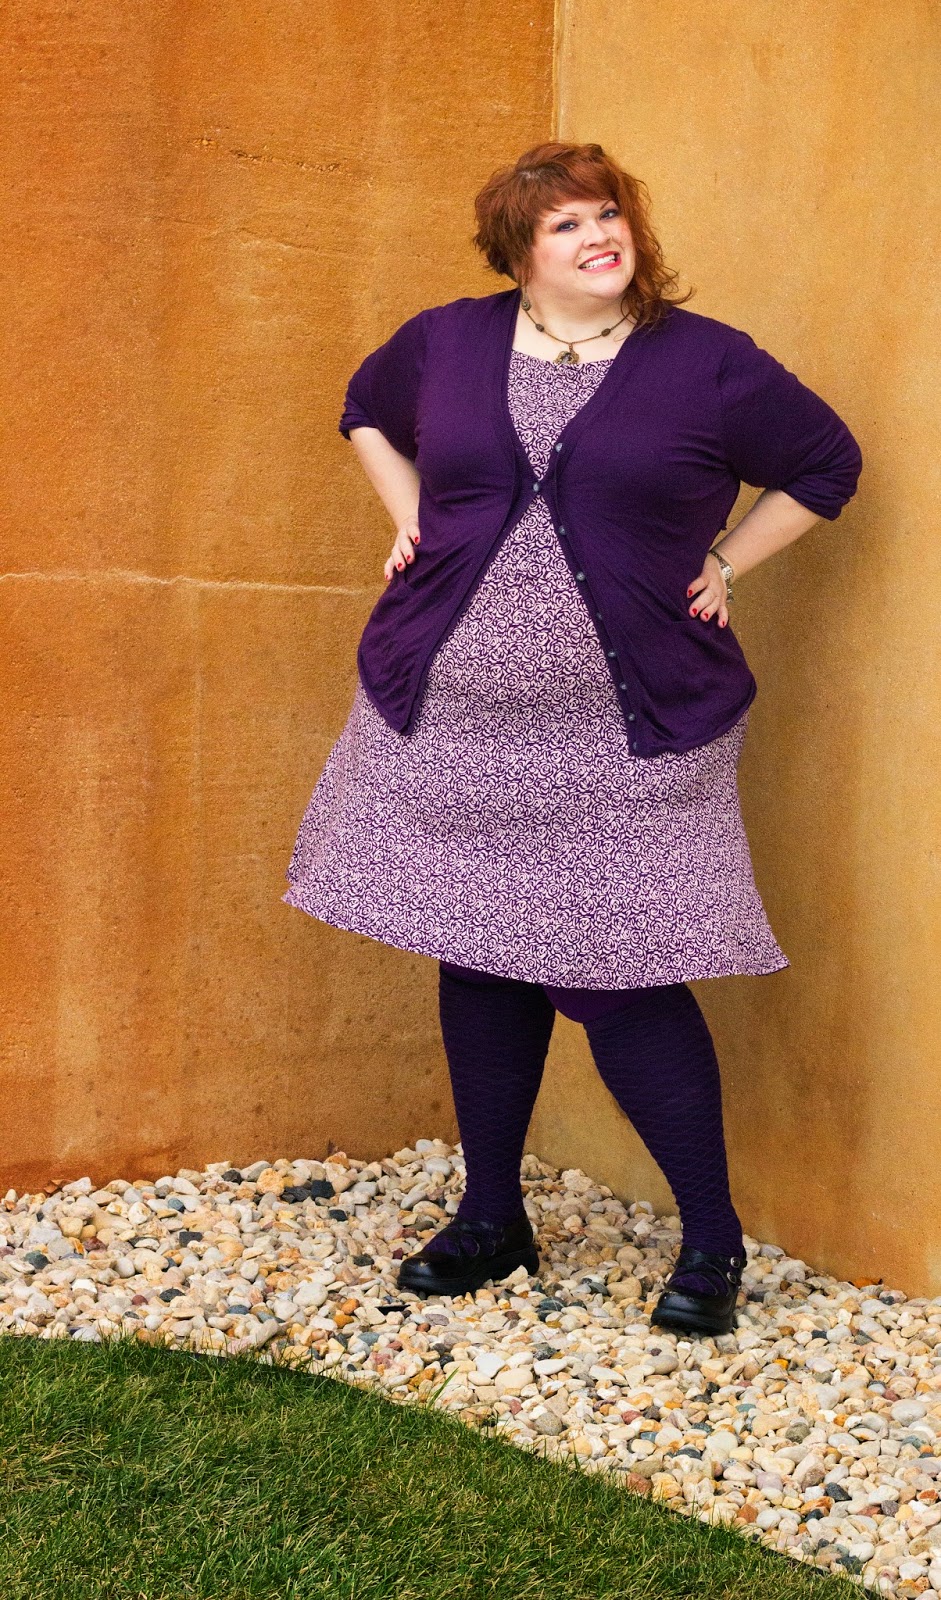 A Classic Black Outfit - Lady in VioletLady in Violet